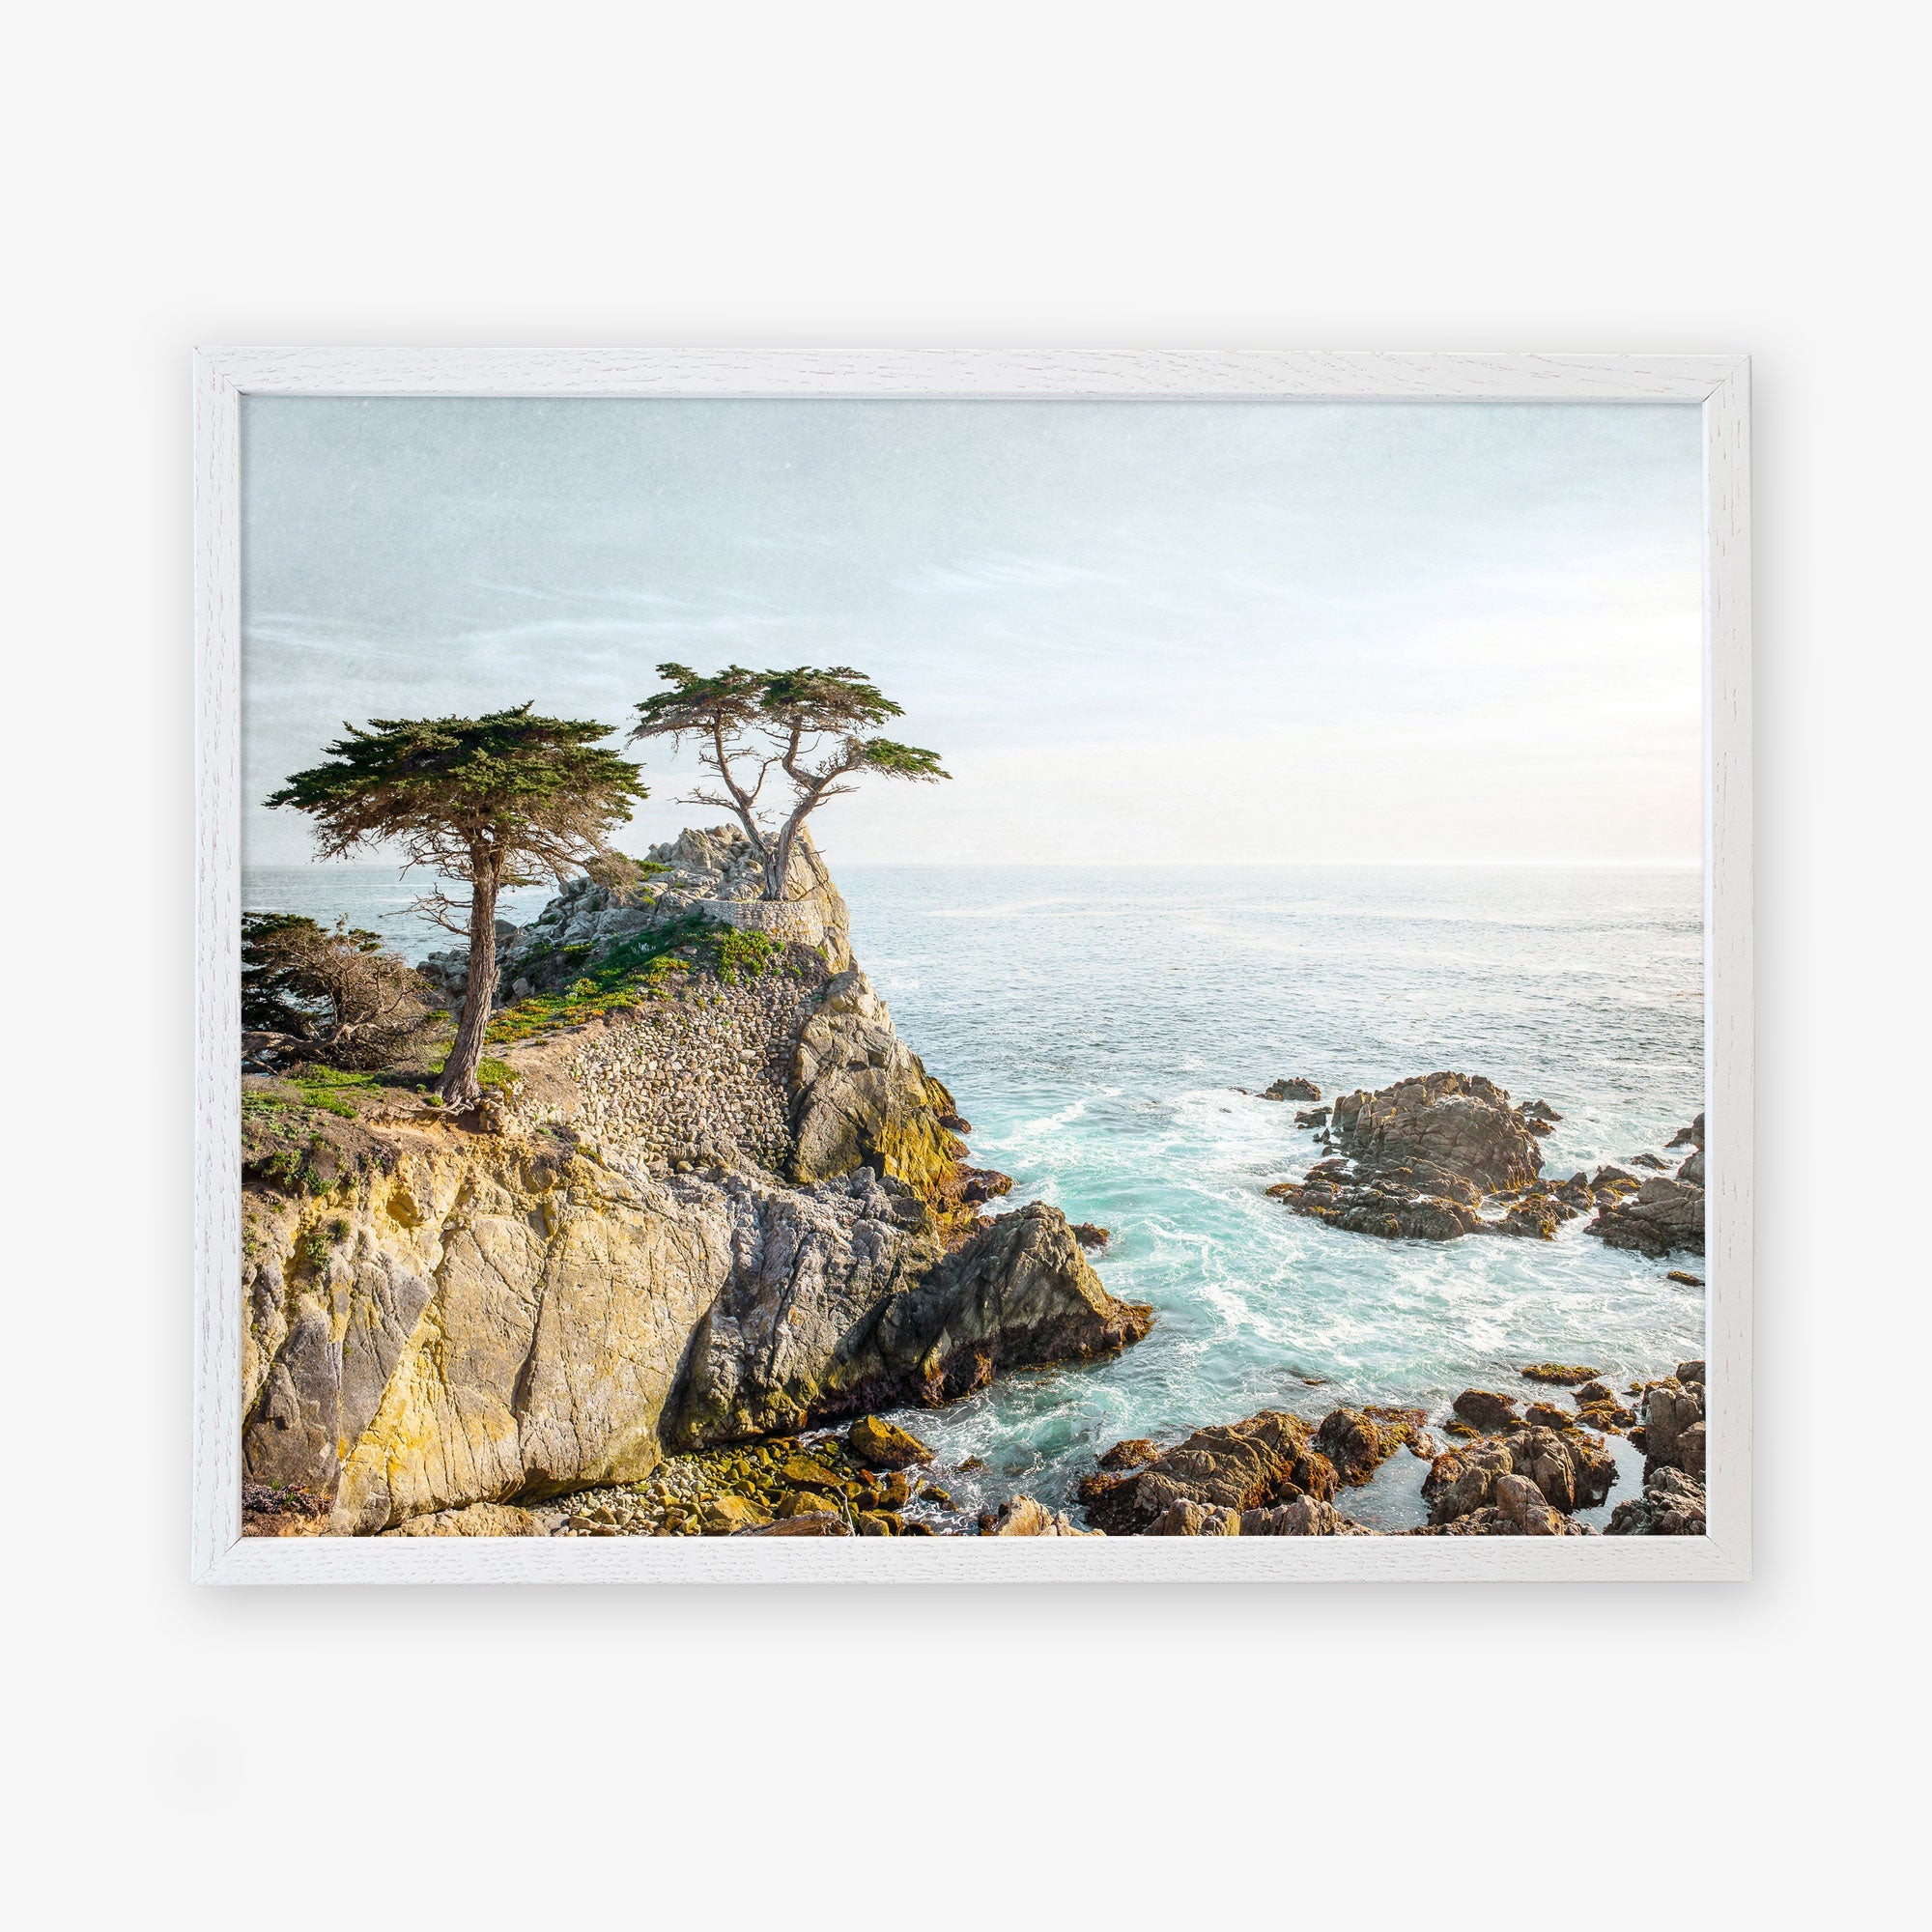 A framed painting of a rugged coastline with pine trees atop a cliff overlooking the sea at Pebble Beach, under a cloudy sky. The scene captures the serene and wild beauty of a coastal landscape. This is the Offley Green California Coastal Print, &#39;Lone Cypress&#39;.